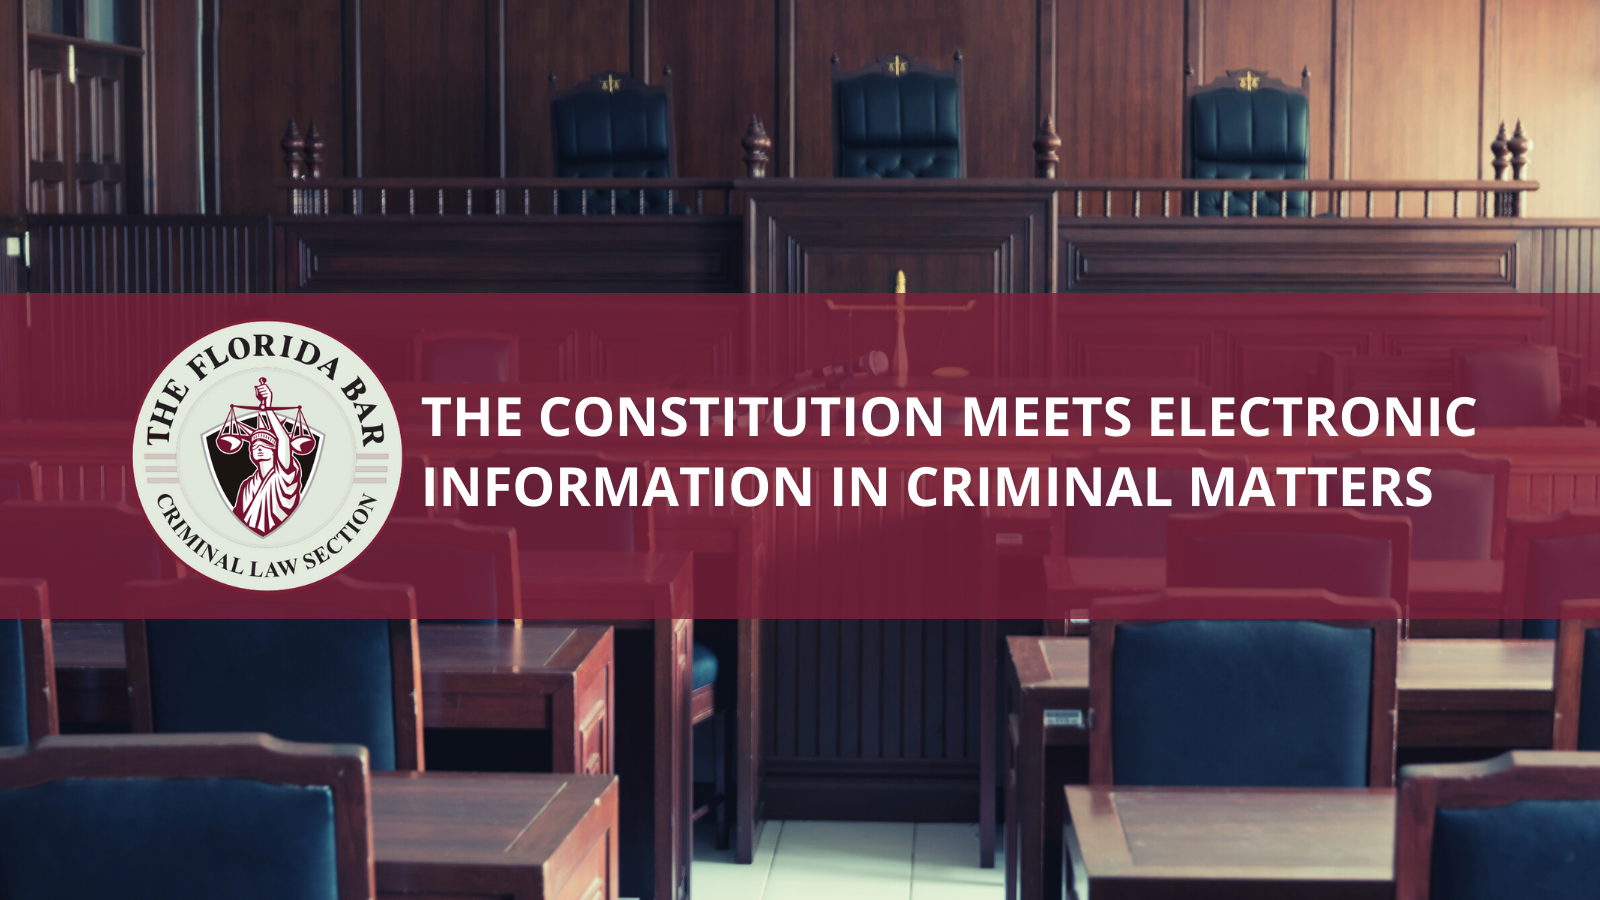 March 9, 2022 The Constitution Meets Electronic Information in Criminal Matters